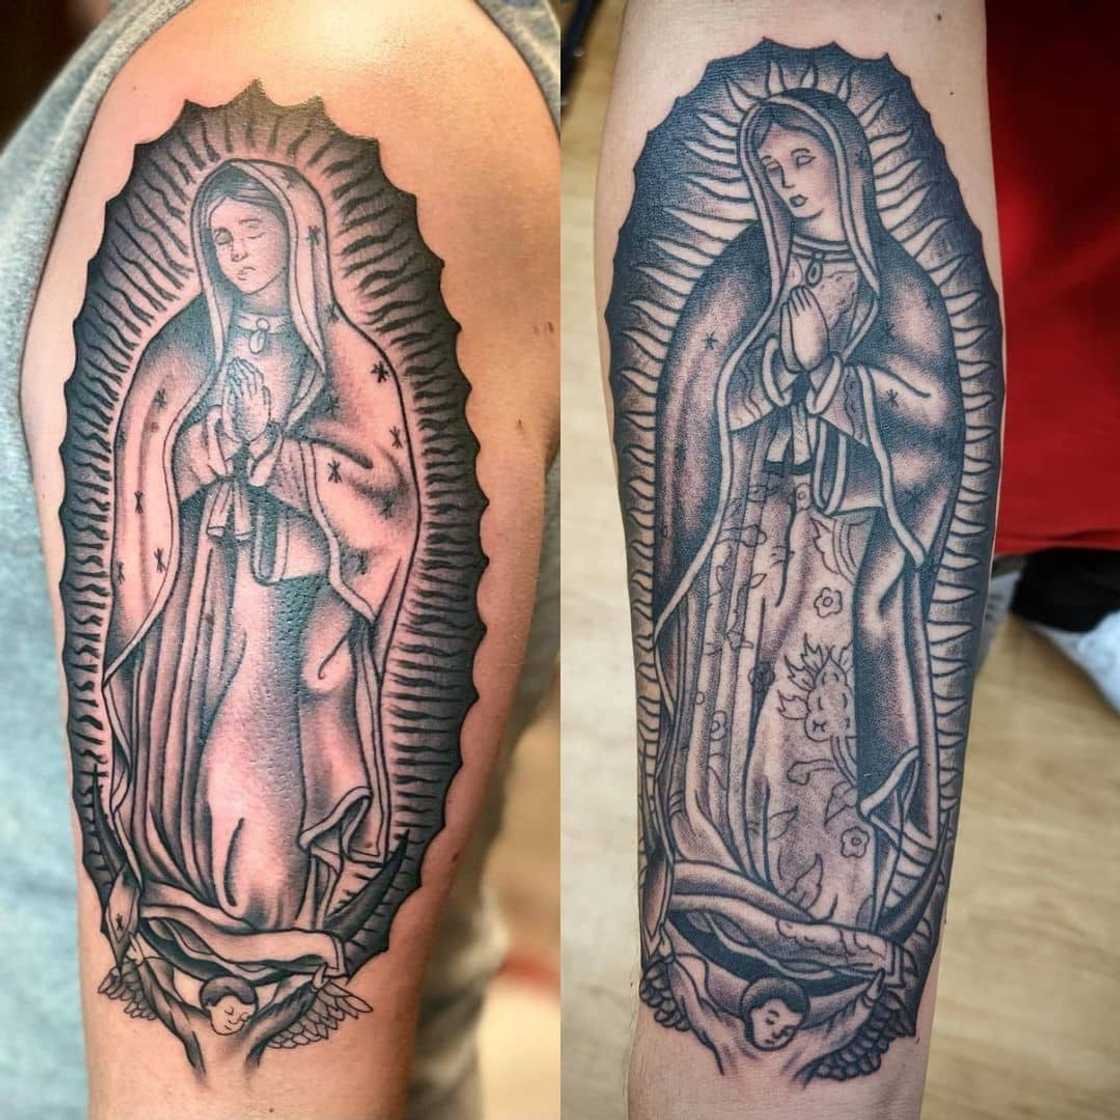 Our Lady of Guadalupe tattoo